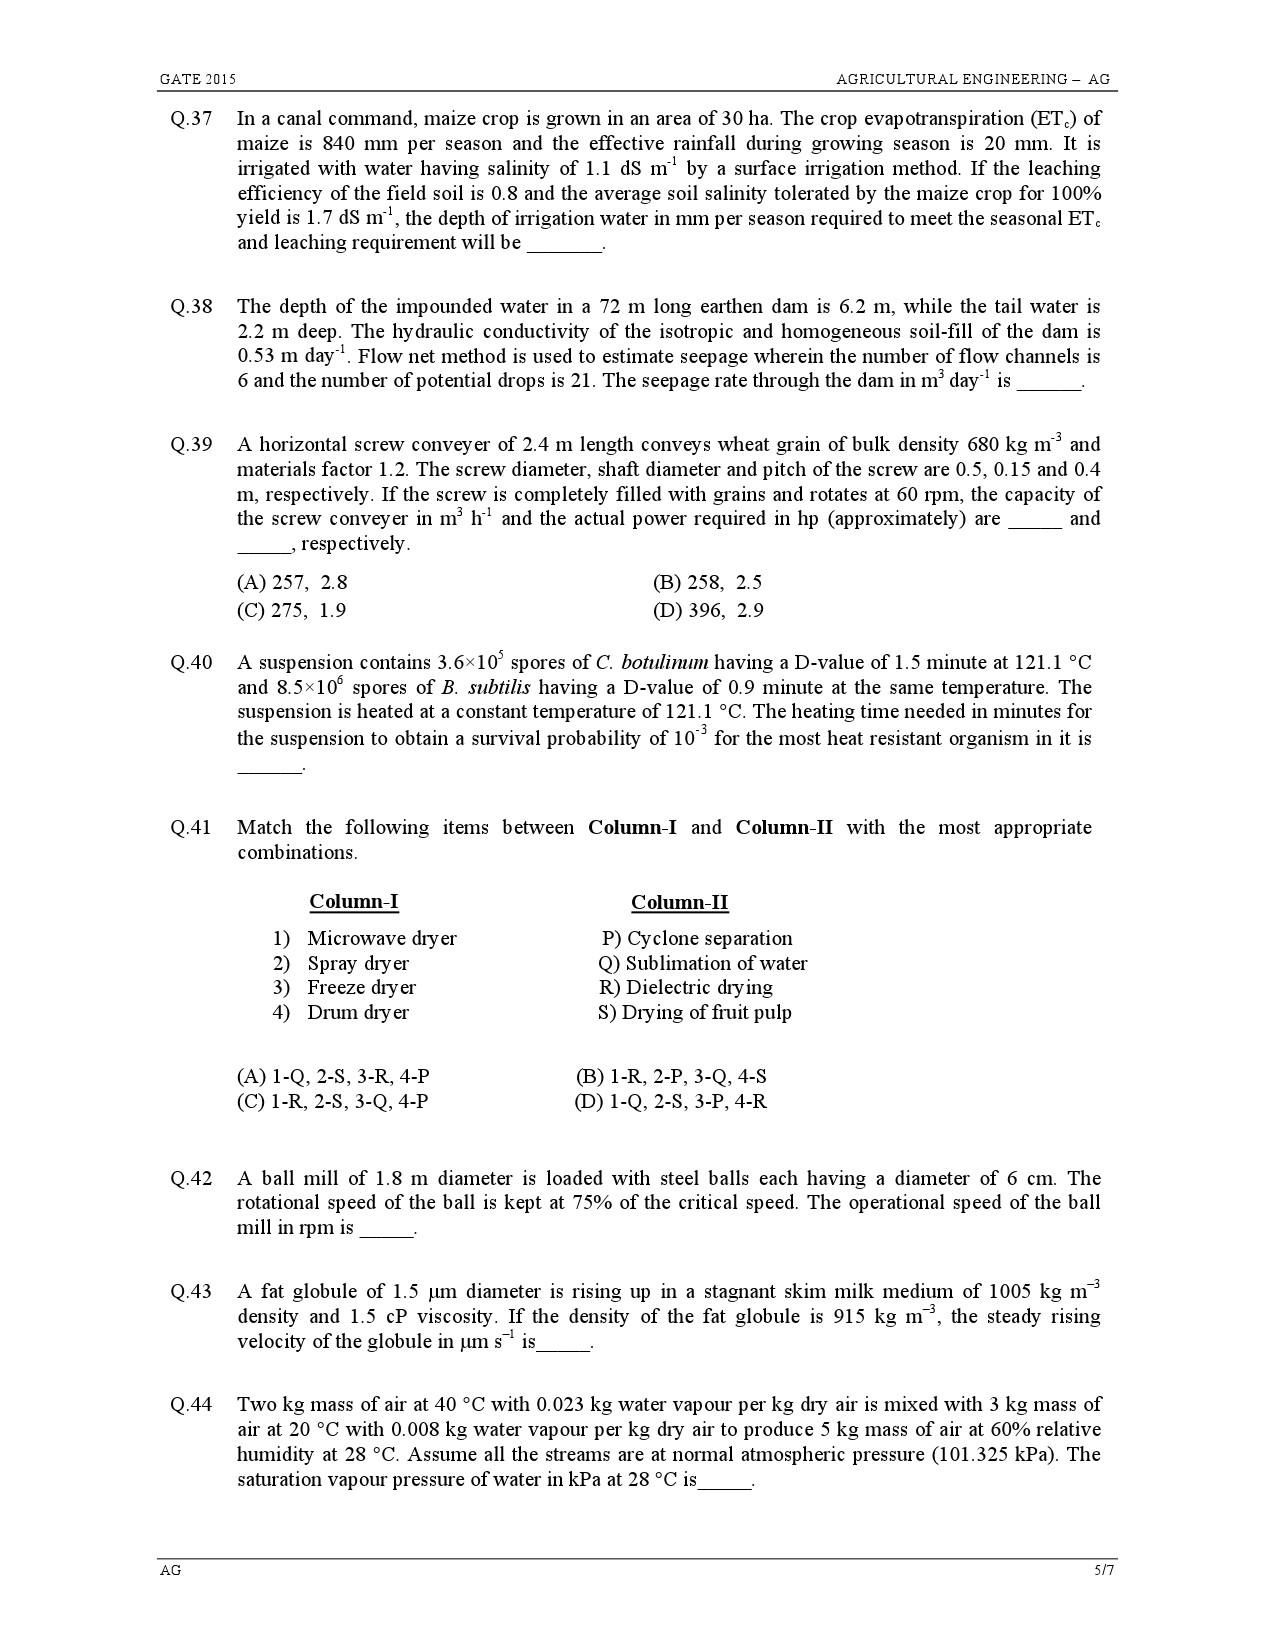 GATE Exam Question Paper 2015 Agricultural Engineering 5